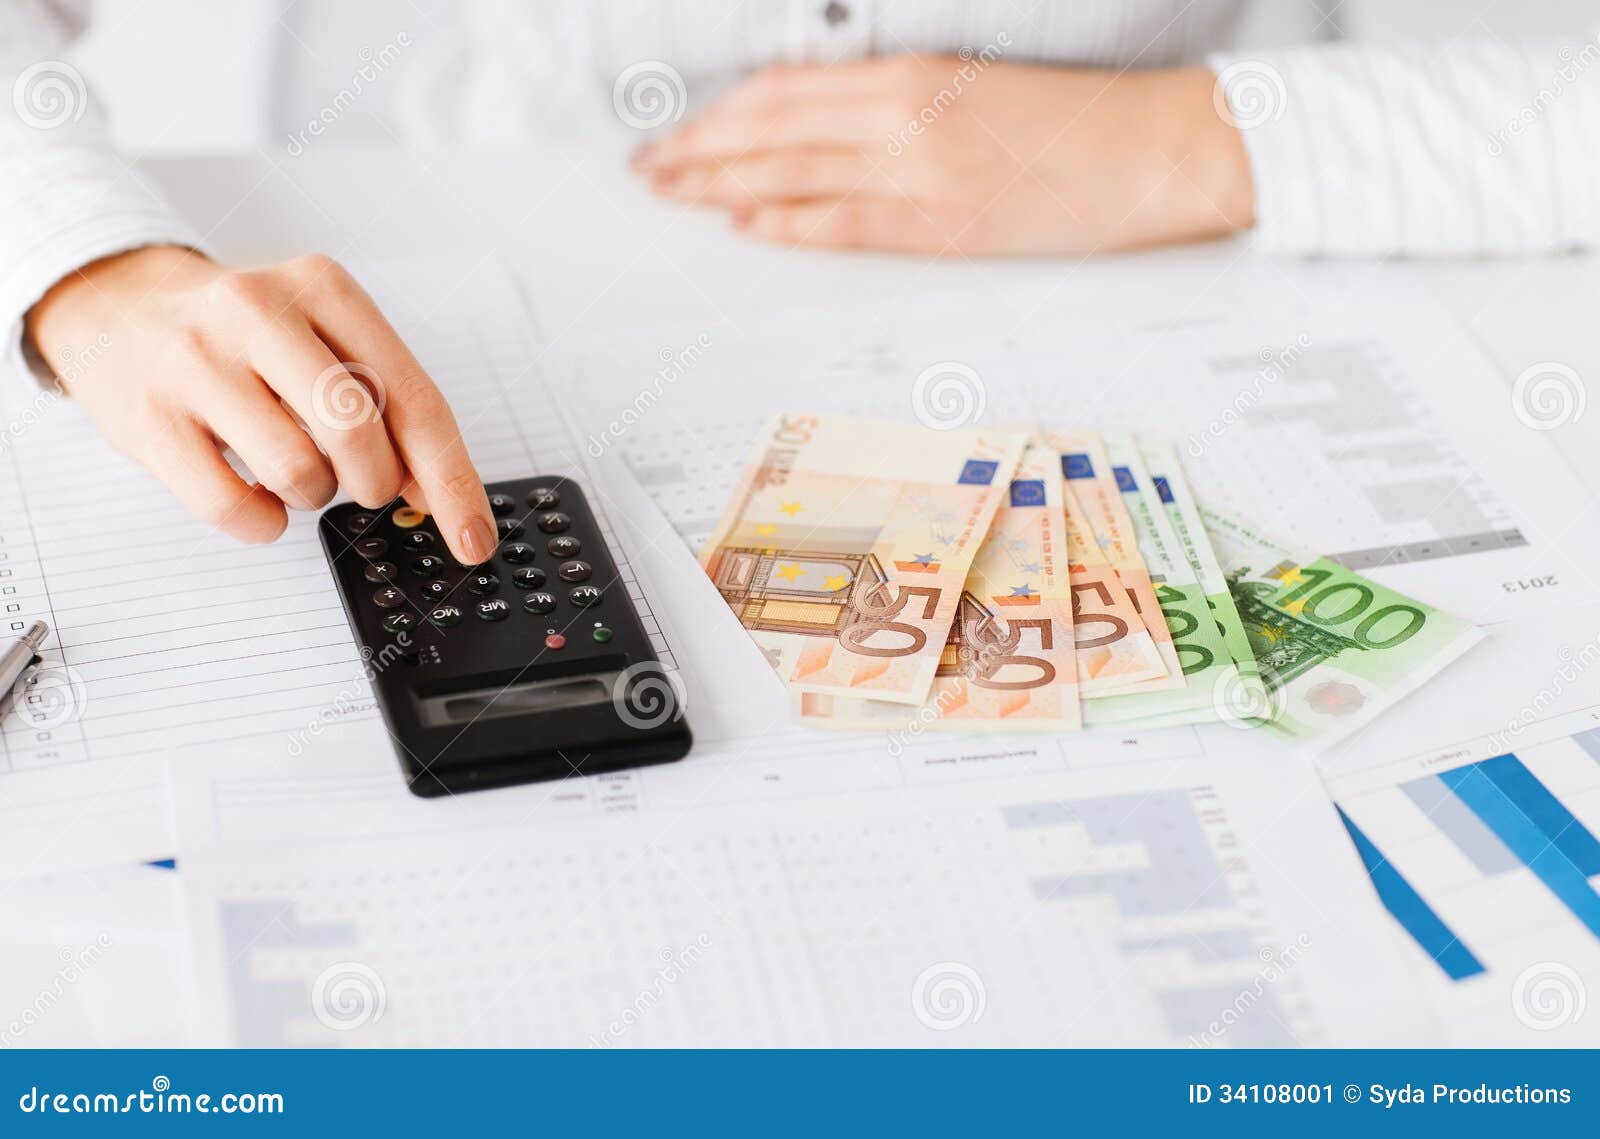 woman hand with calculator and euro money